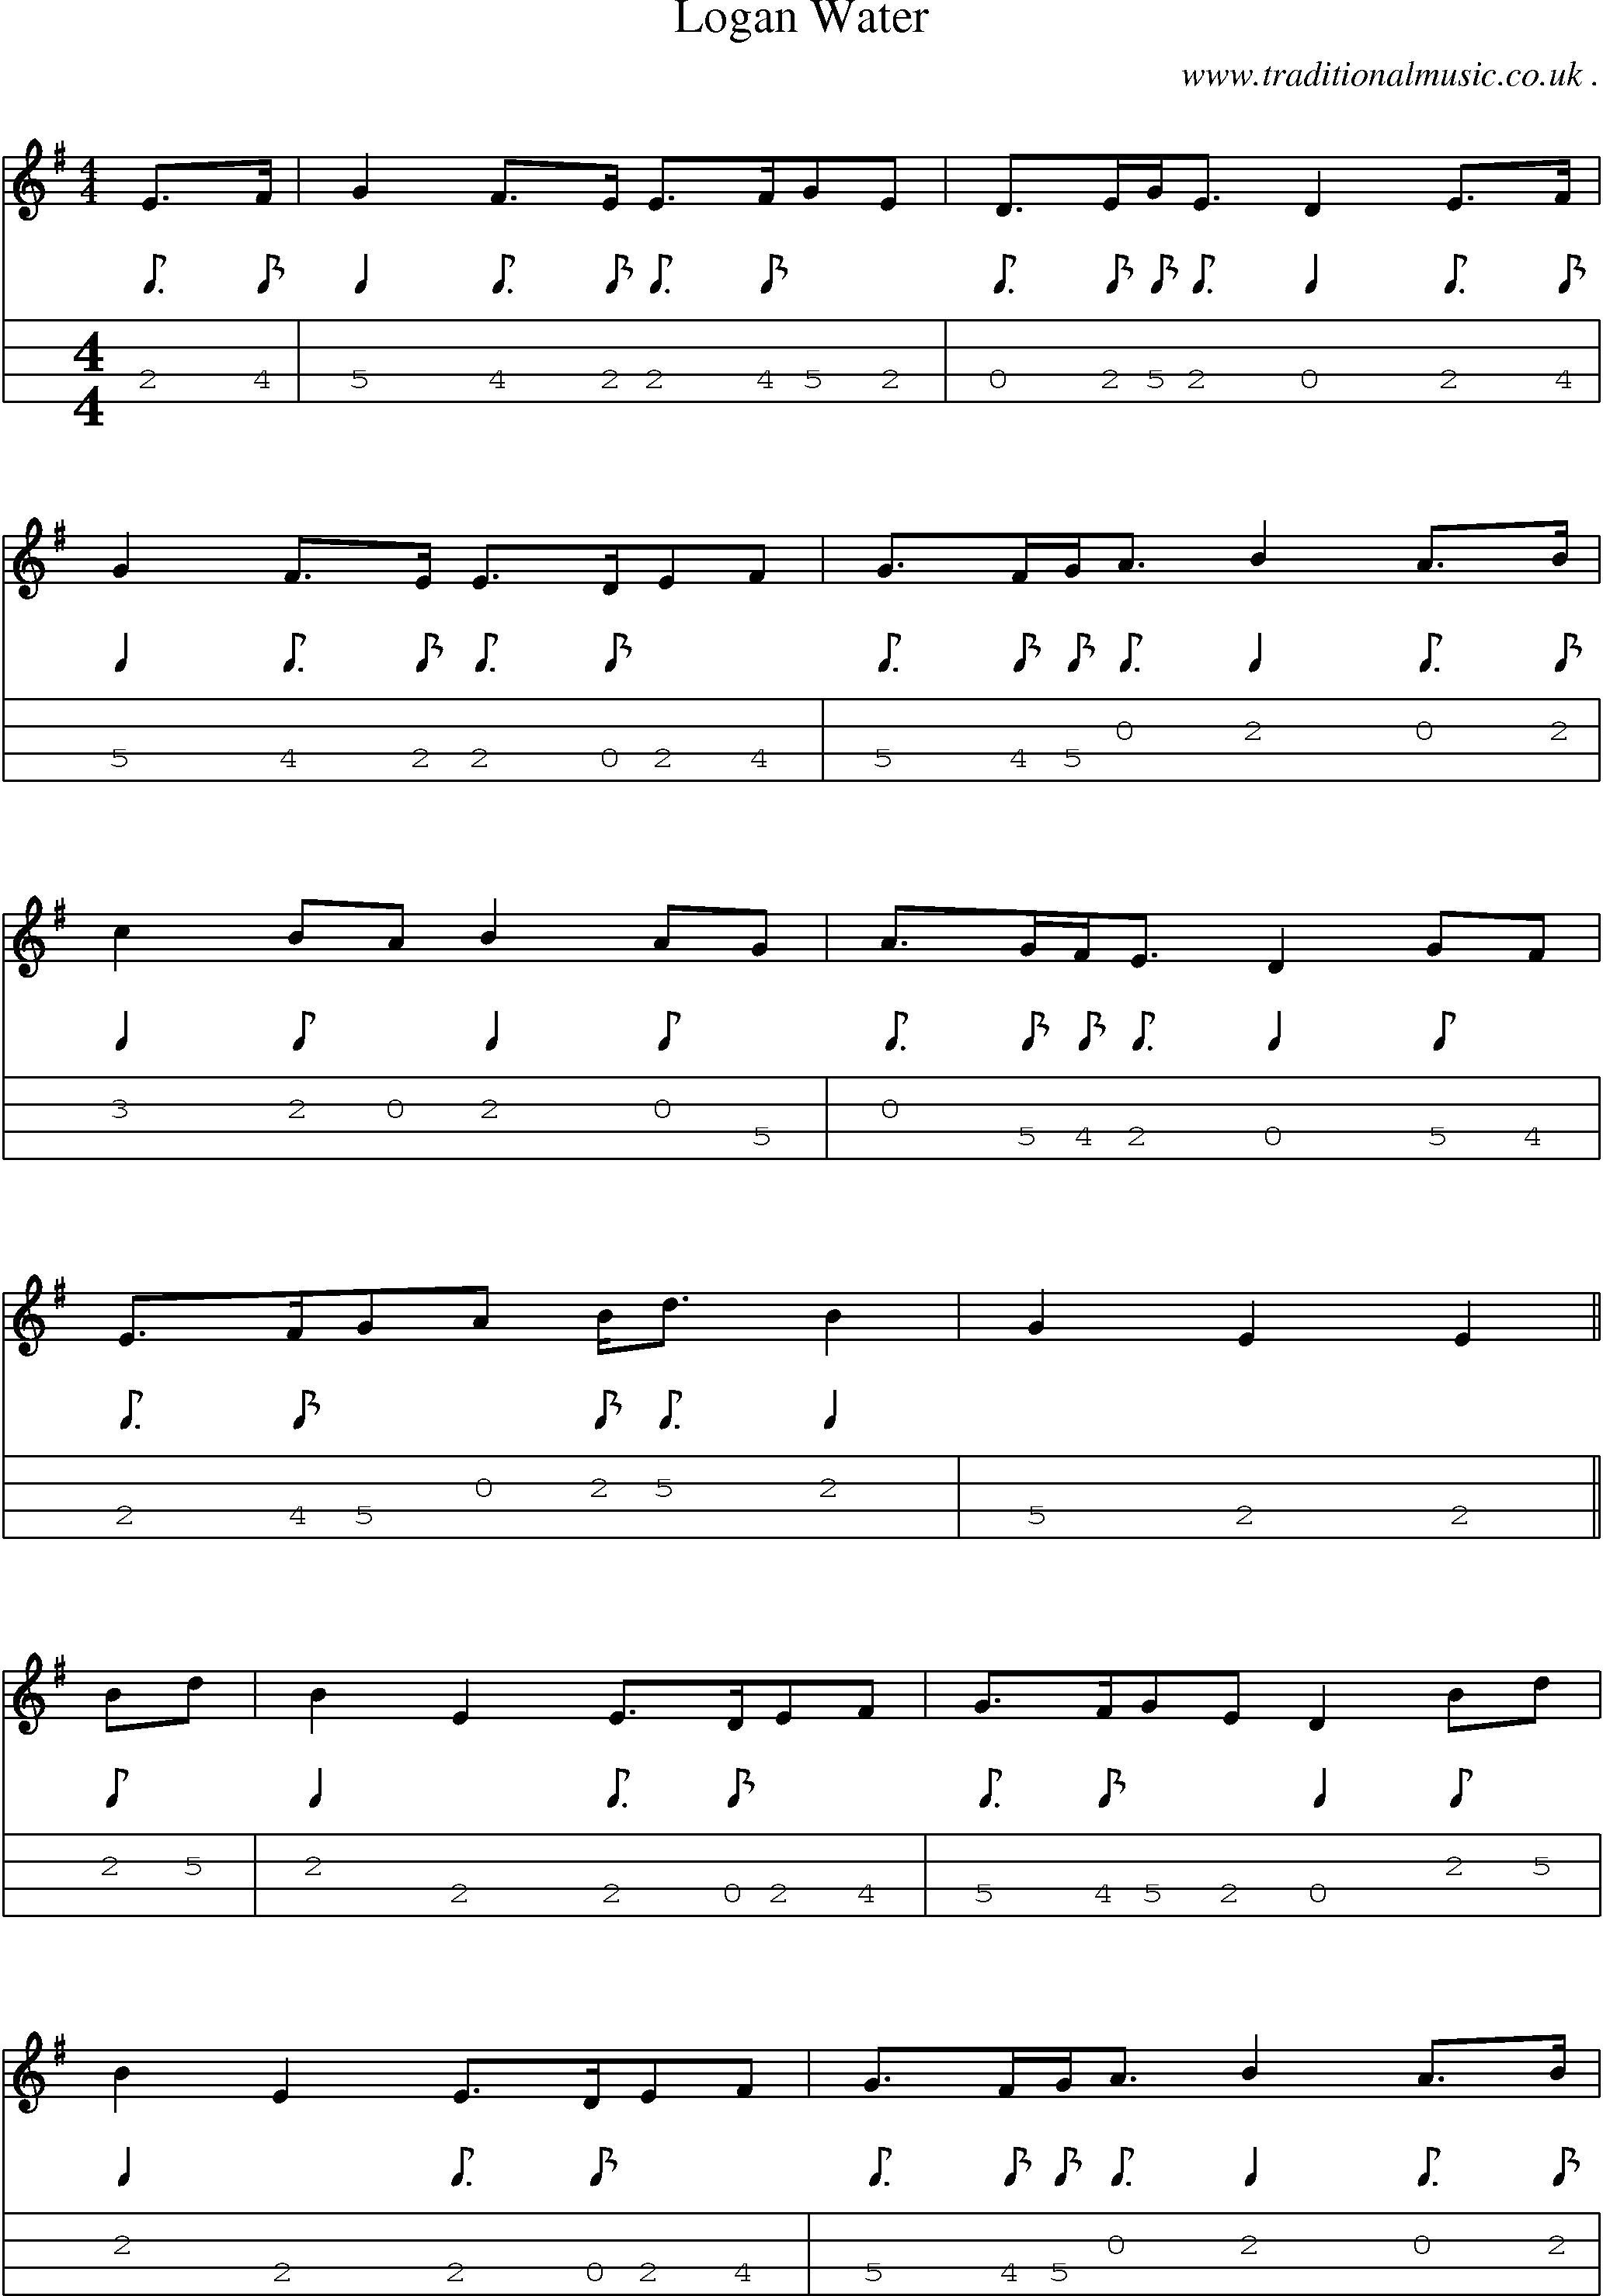 Sheet-music  score, Chords and Mandolin Tabs for Logan Water